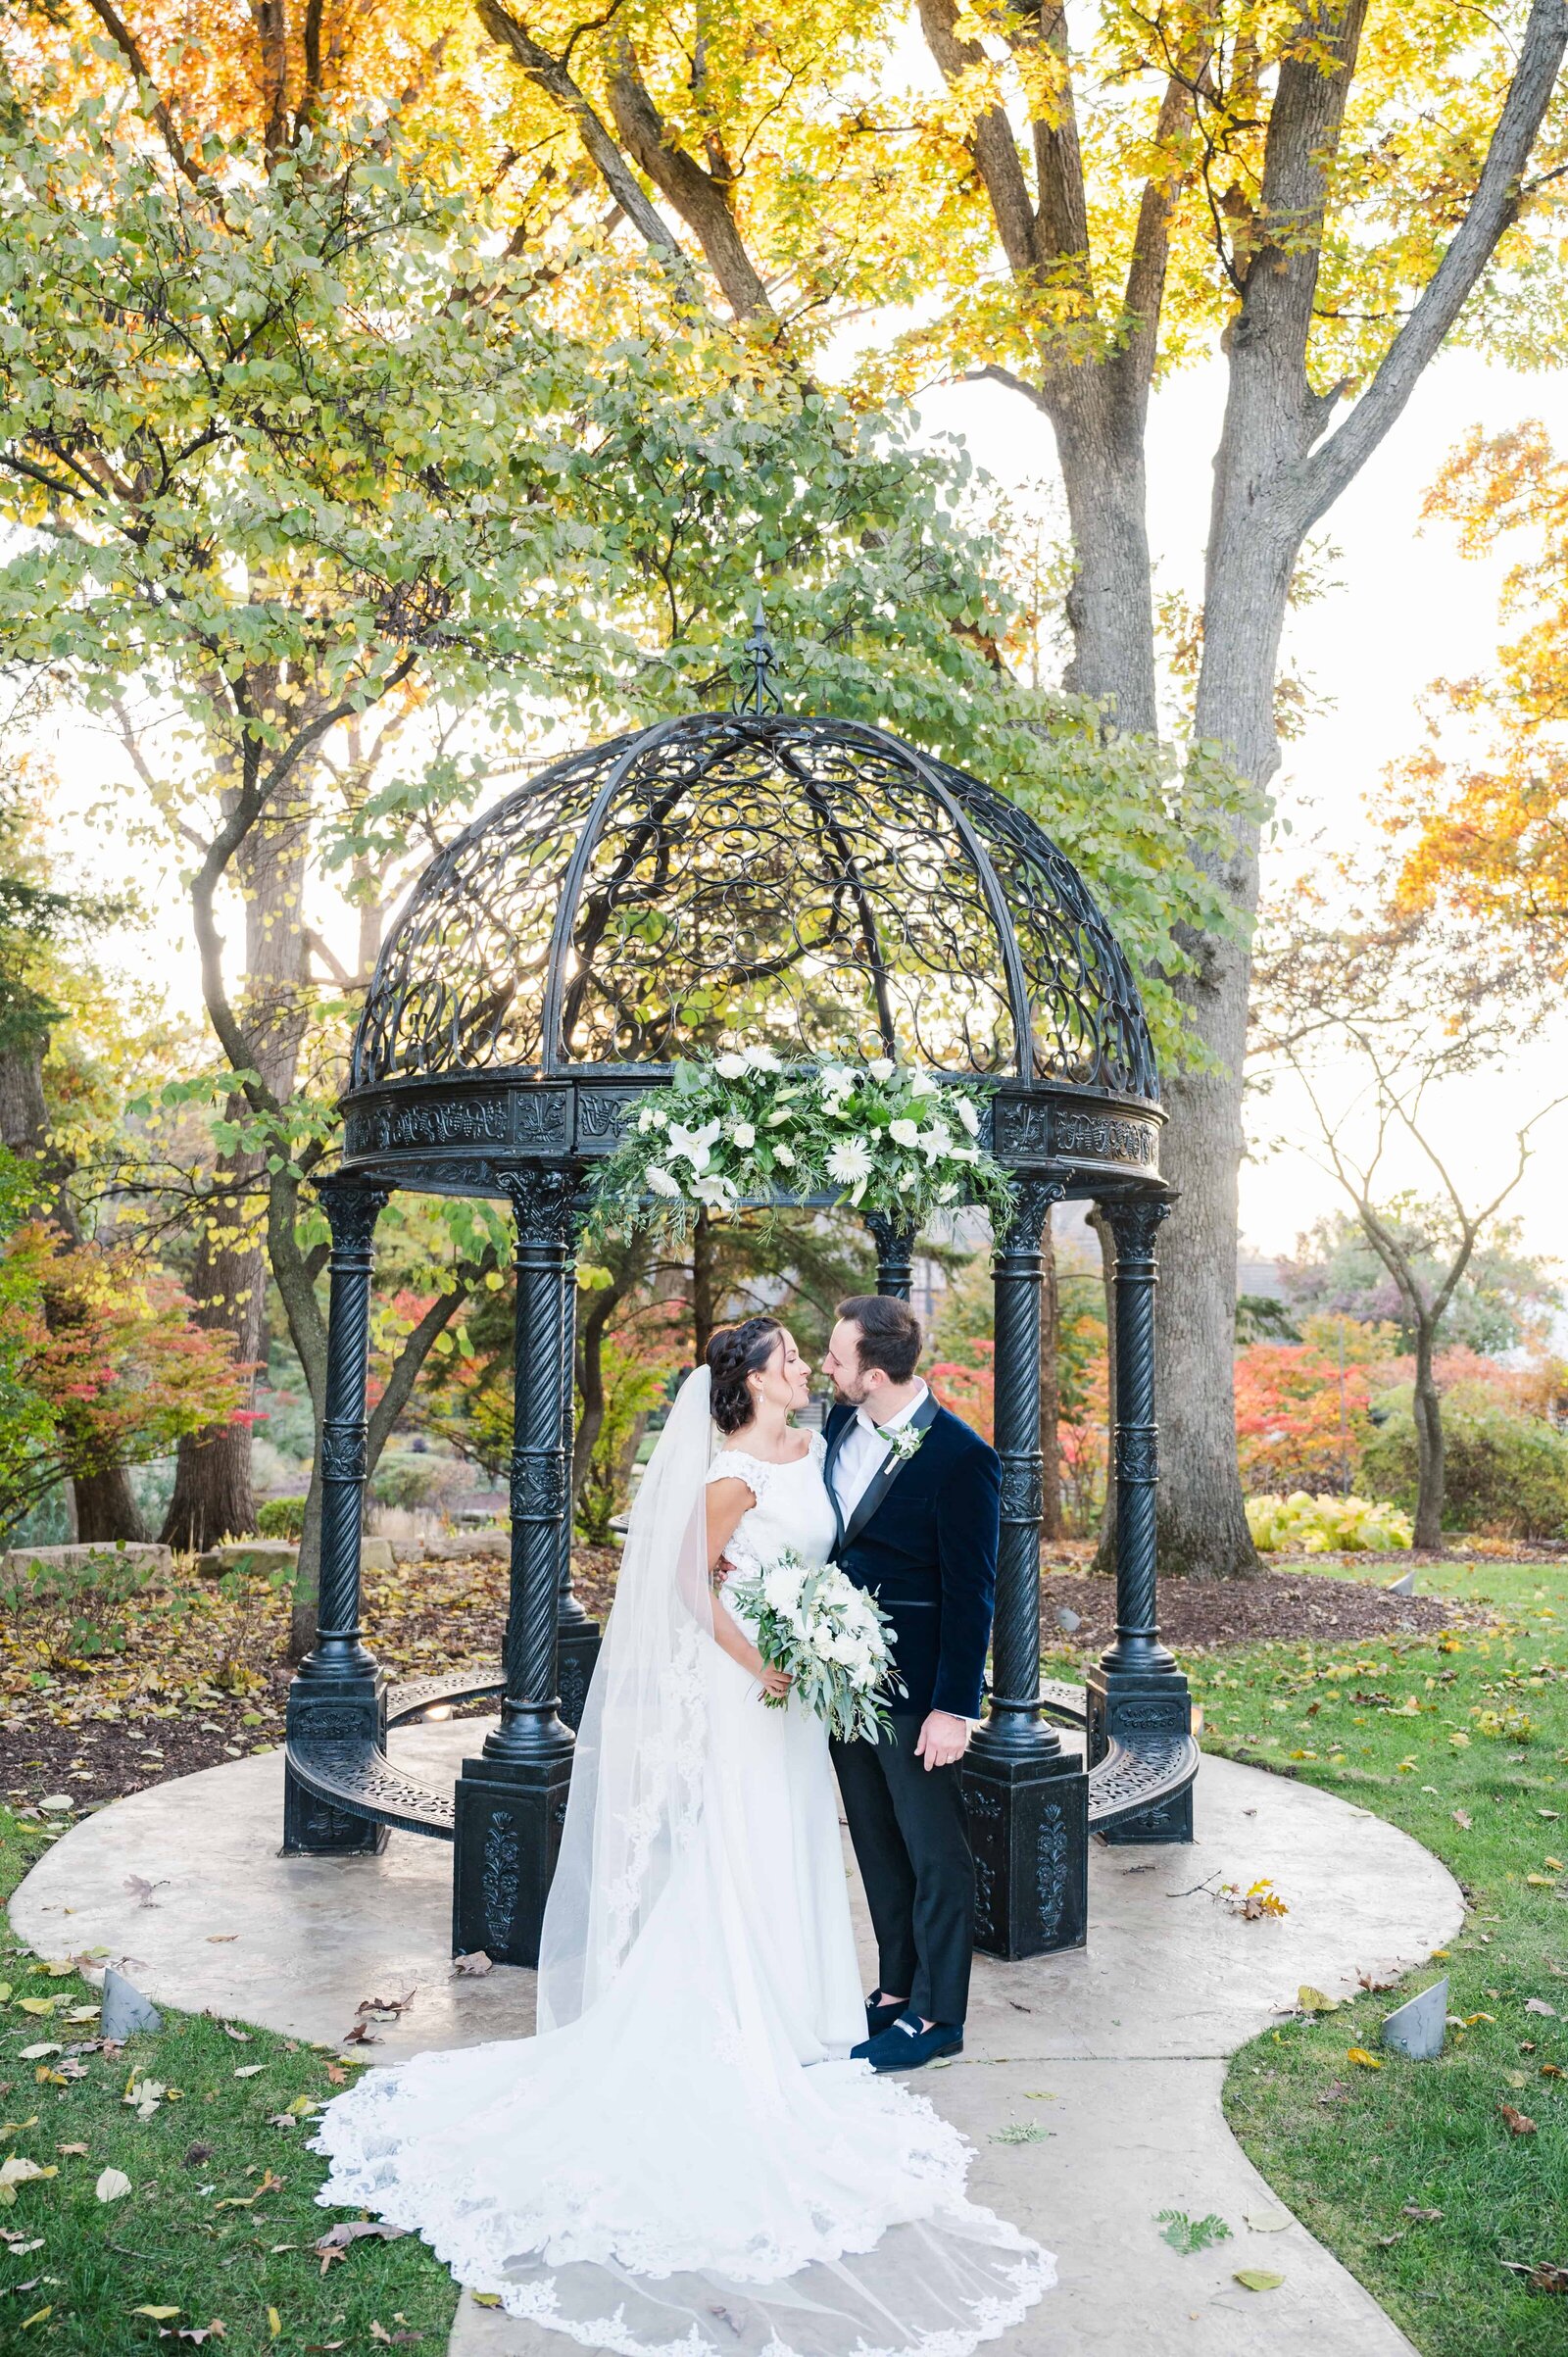 Autumn wedding portrait with bride and groom sharing a kiss .